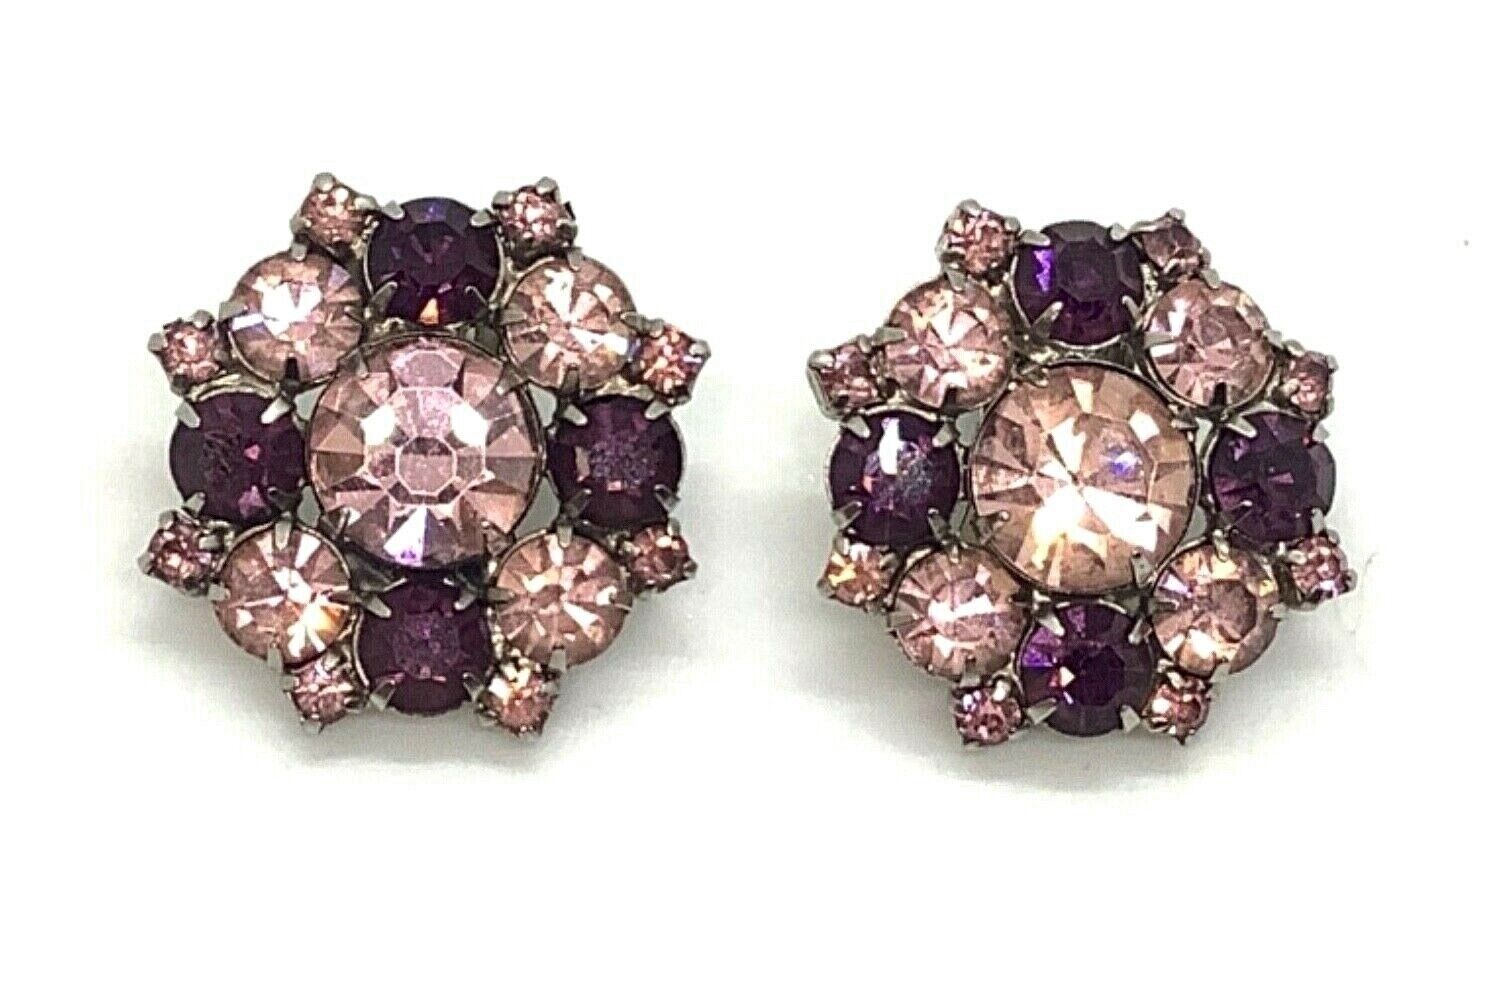 Silver Toned Round Clip-On Costume Earrings w/ Light Pink & Plum Toned Crystals